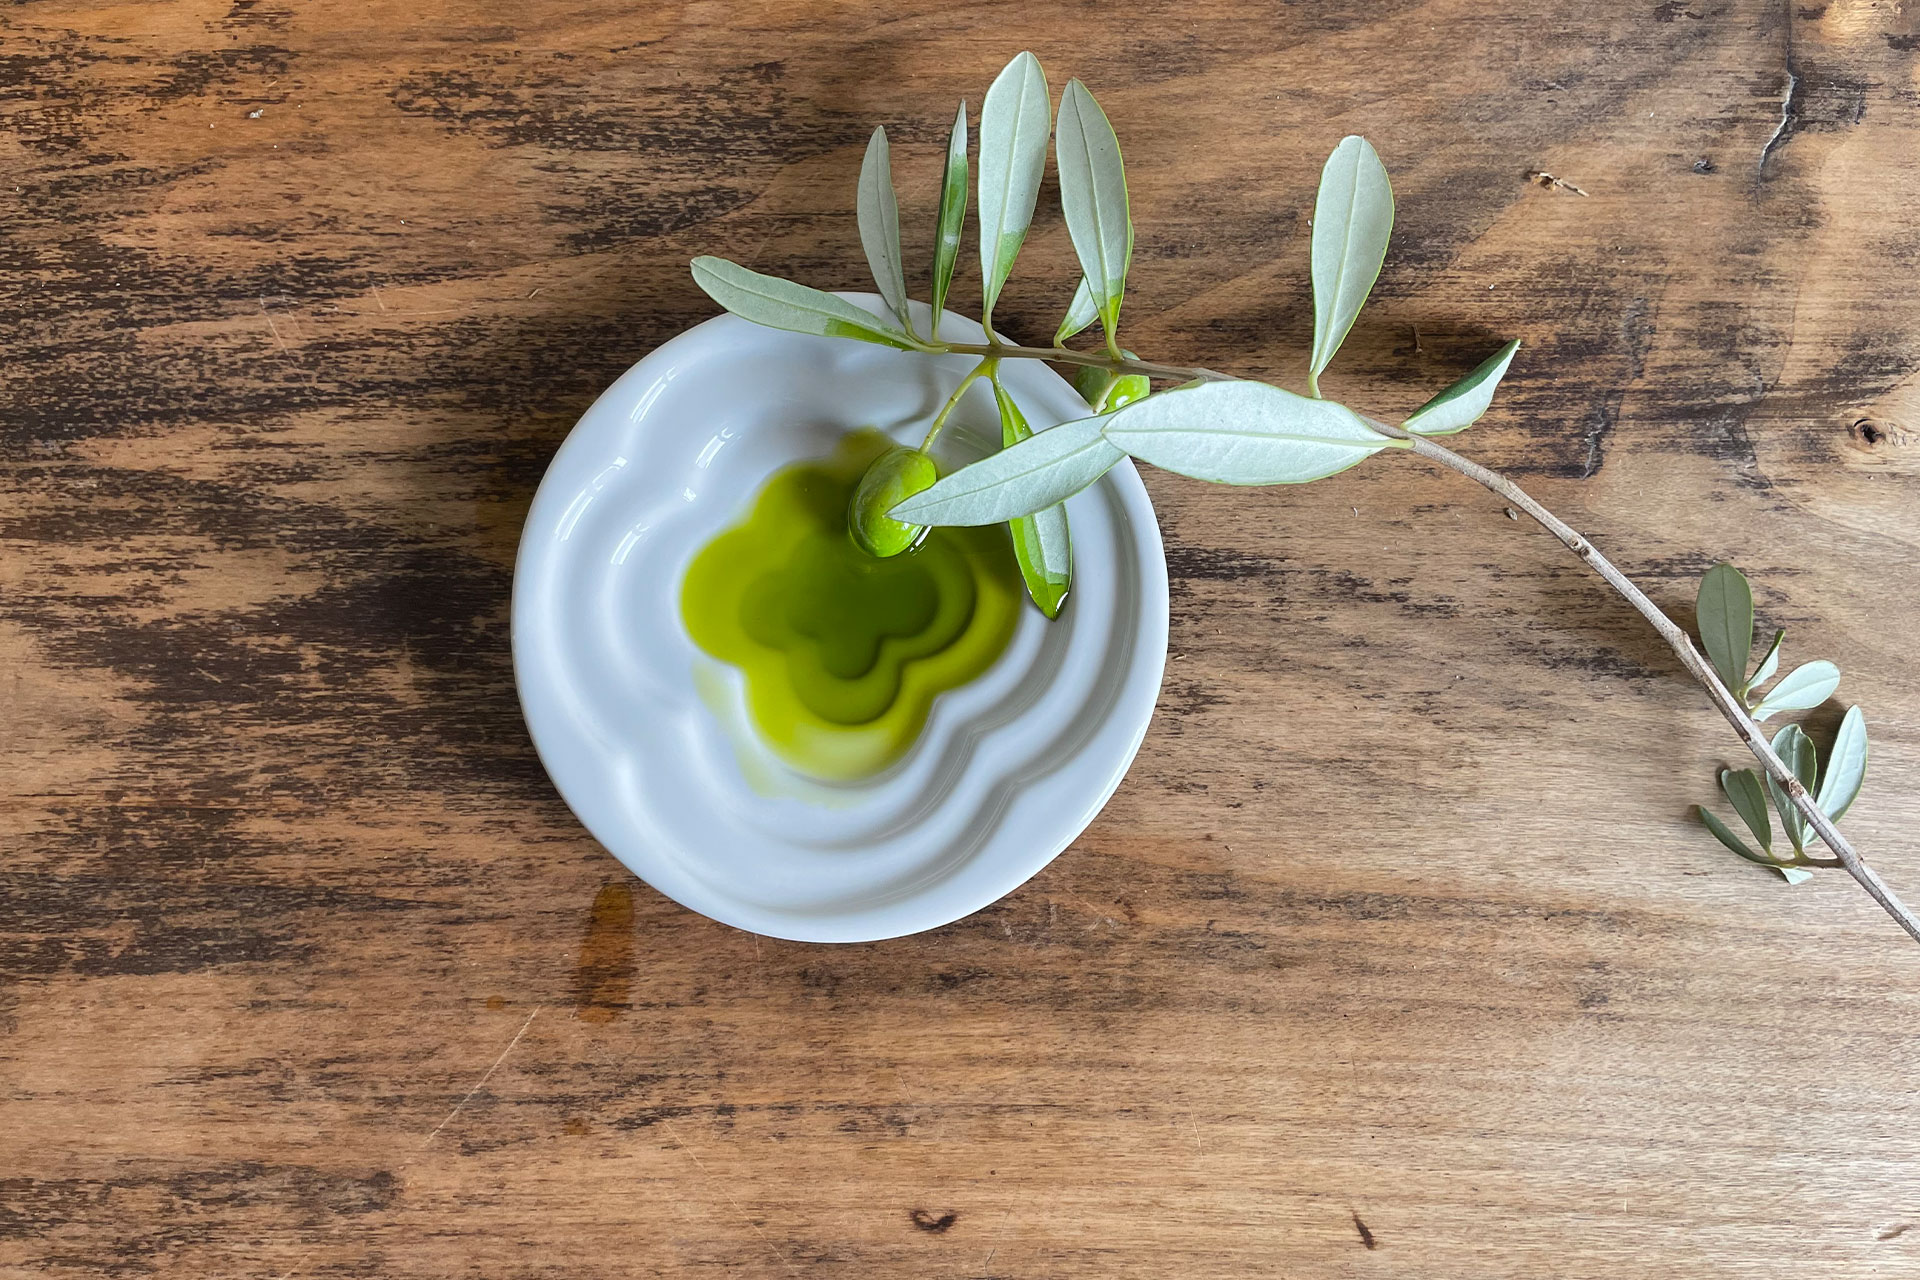 Olive Oil 101: What is EVOO, Really?